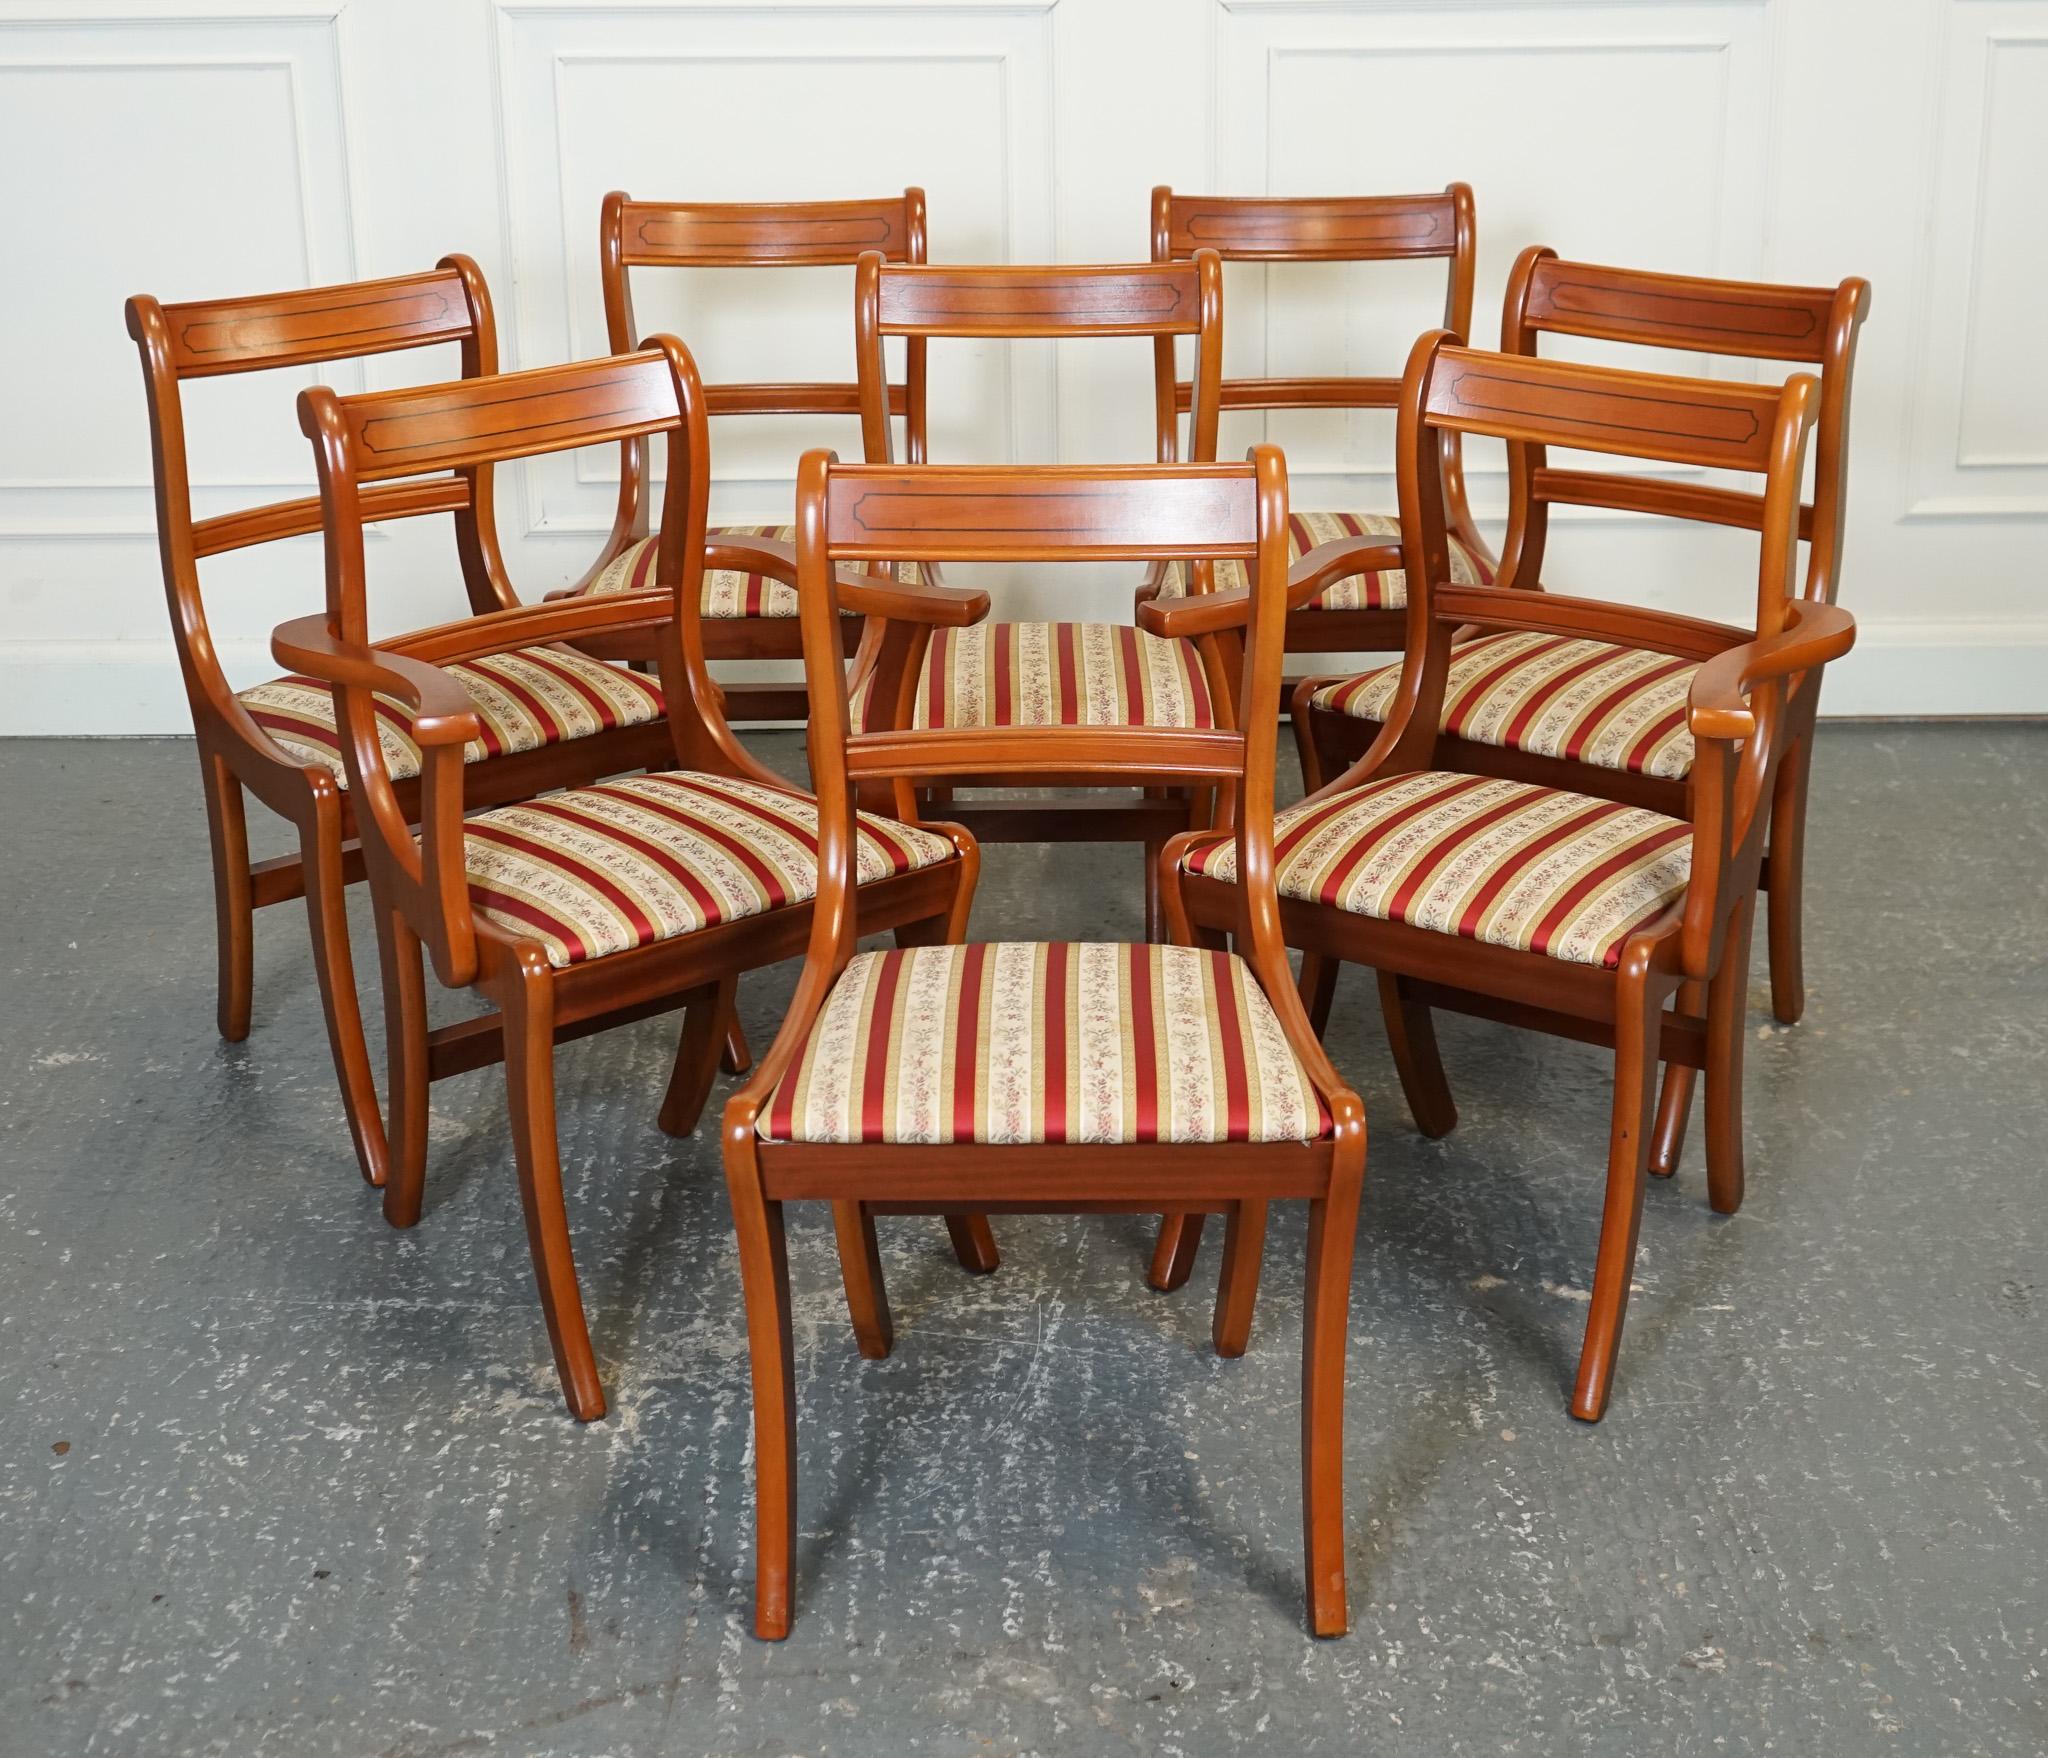 Antiques of London



We are delighted to offer for sale this Lovely Set of 8 Yew Wood Dining Chairs.

The set of 8 dining chairs features a stunning combination of yew wood frames with stripe upholstery. This luxurious collection includes 6